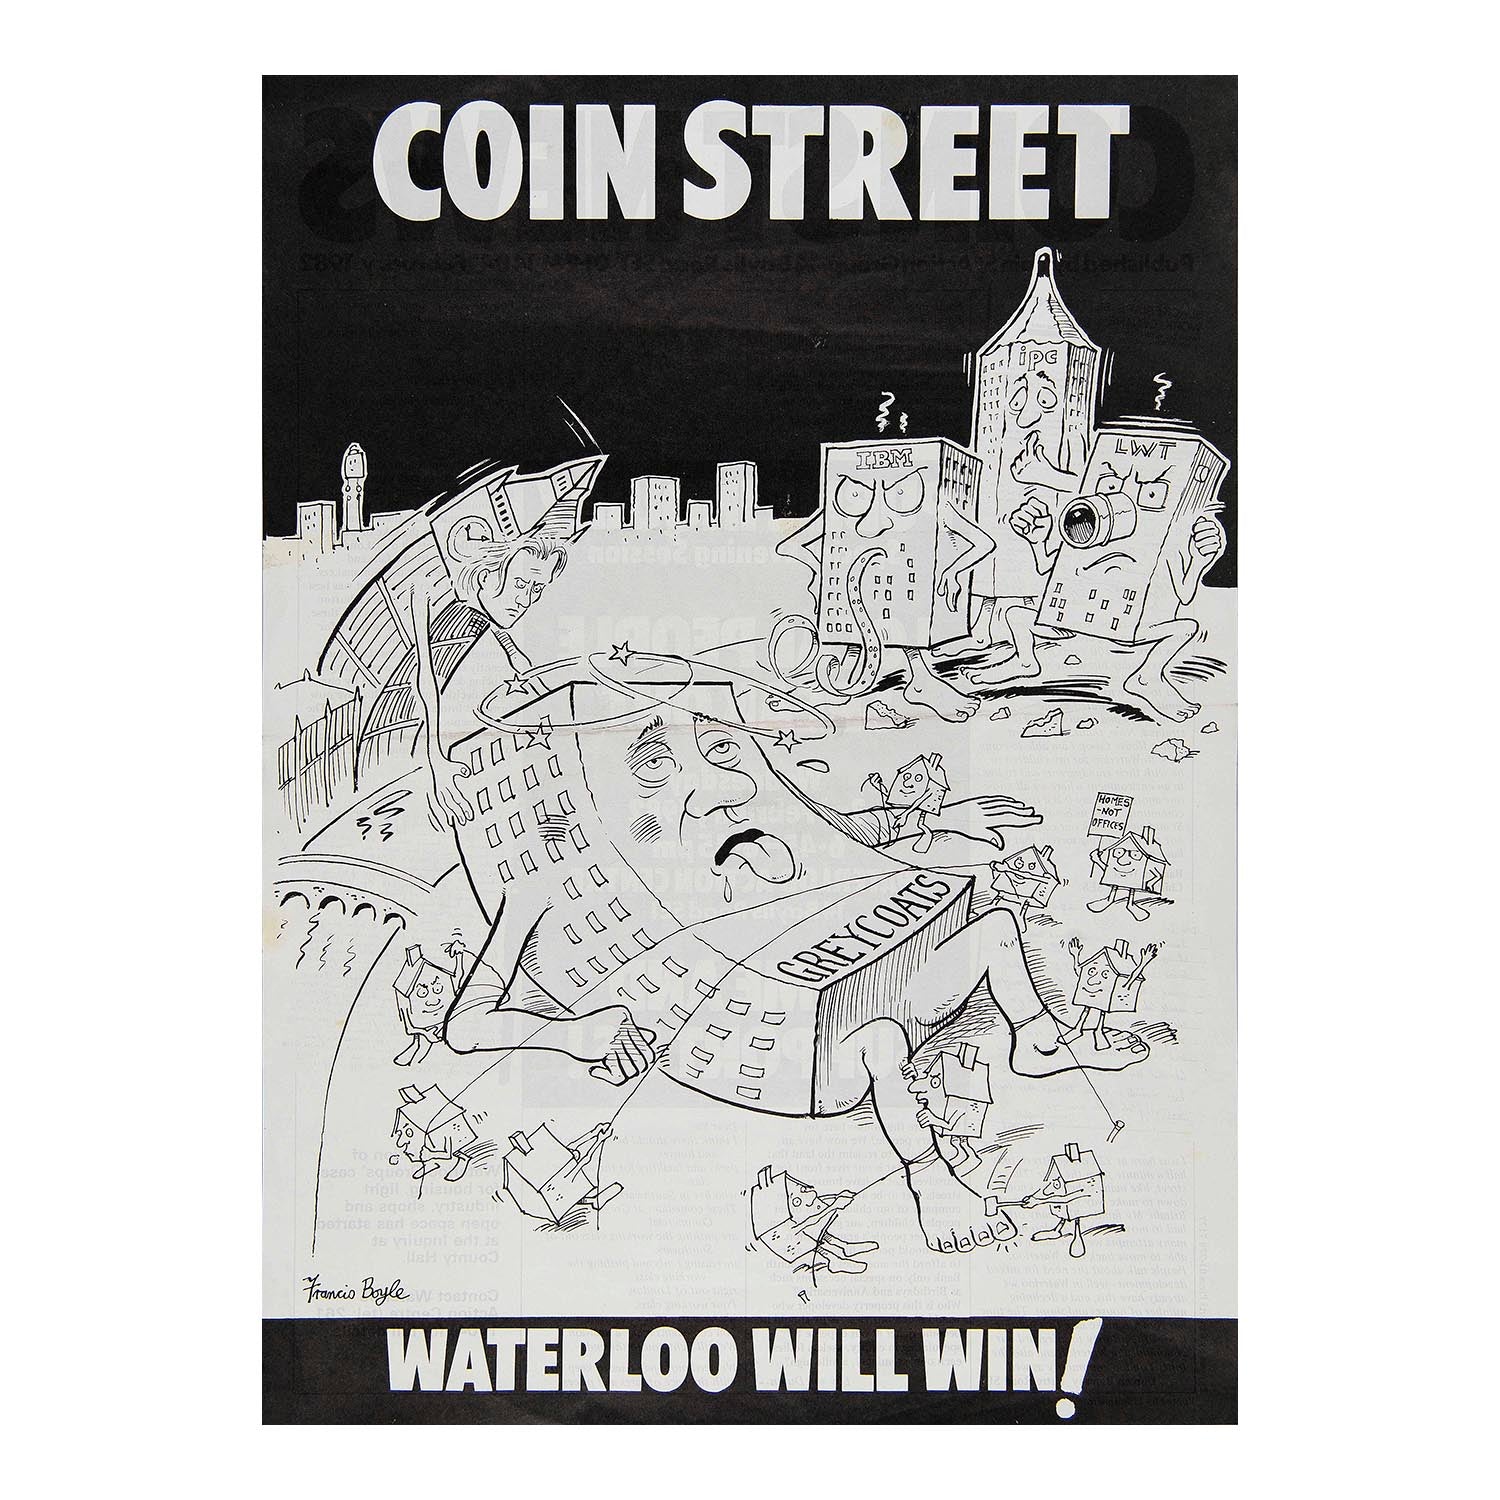 Original double-sided Coin Street Action Group poster/newsletter, 1982